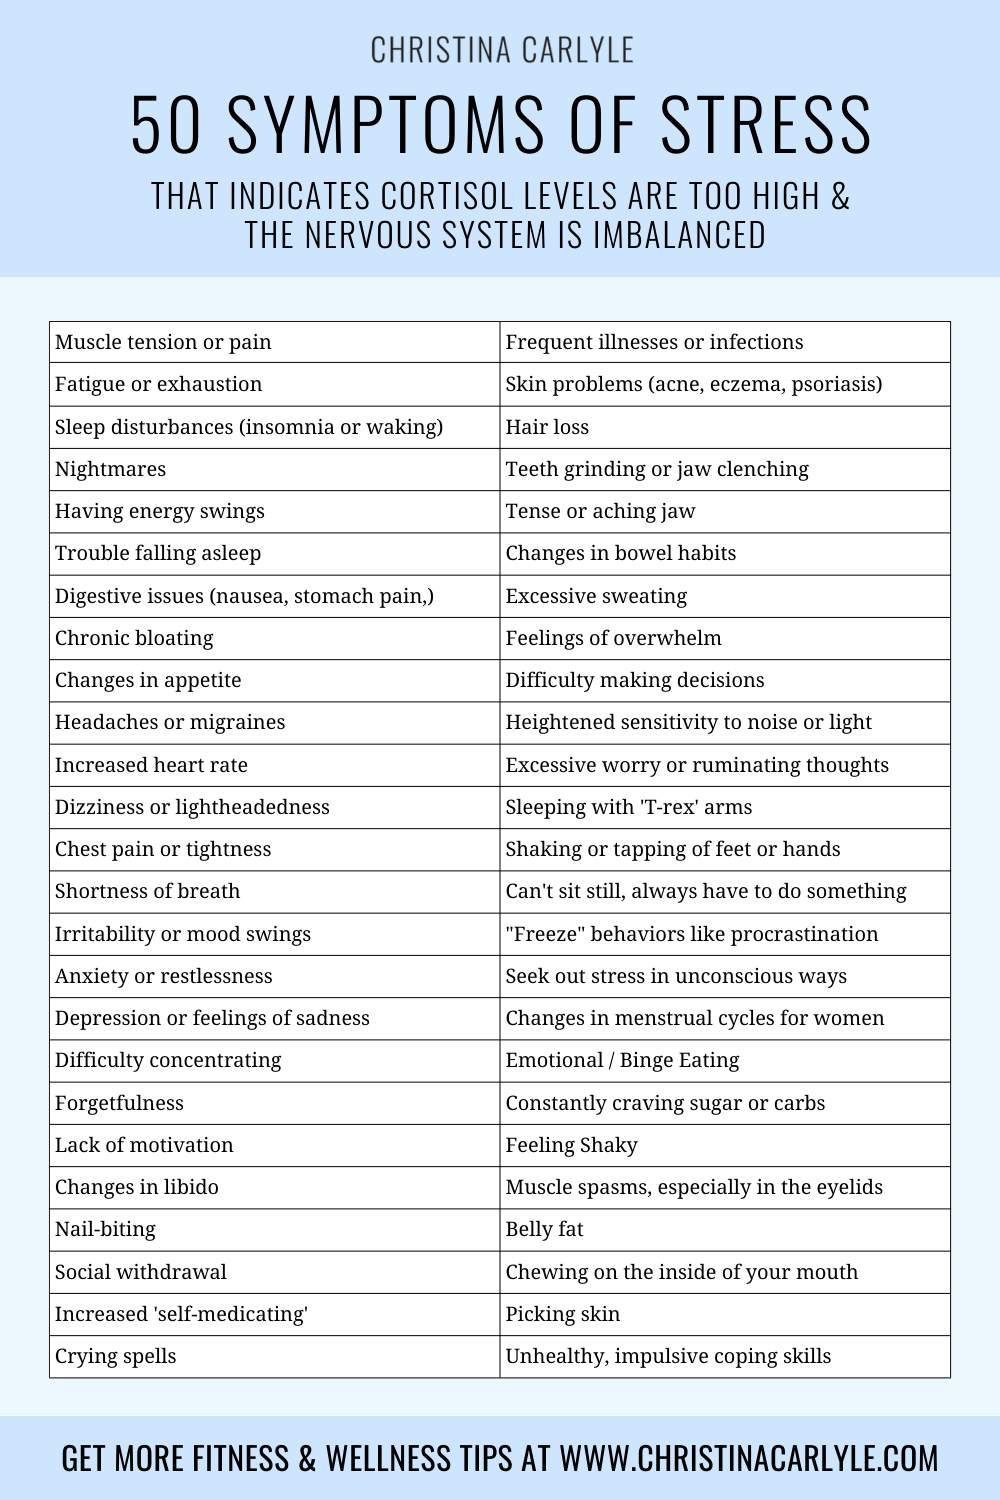 a list of 50 different symptoms of stress